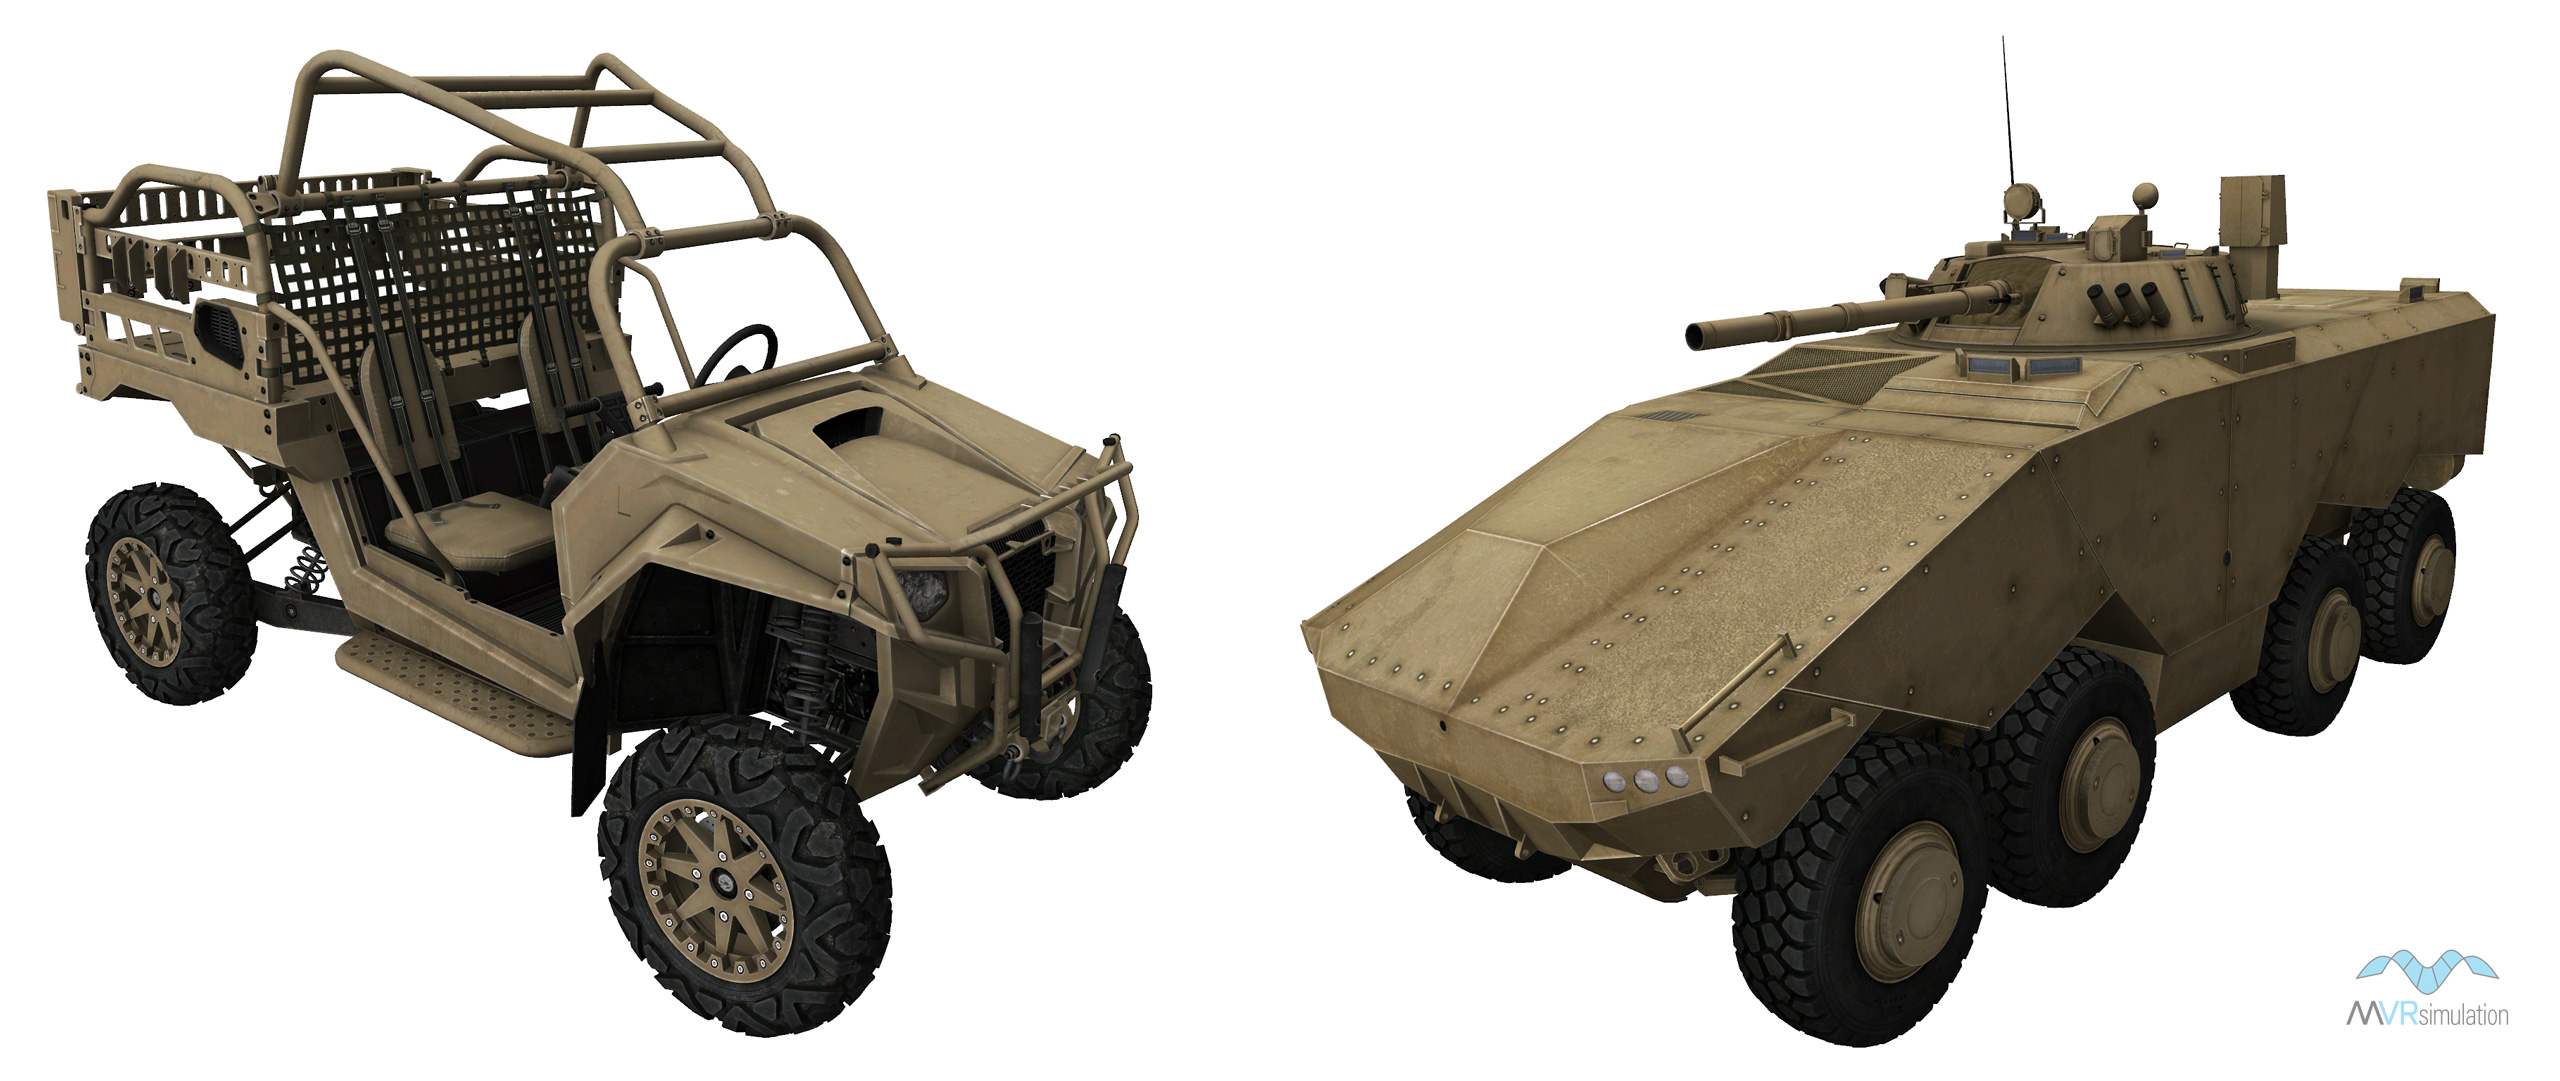 MVRsimulation's MRZR-2 and Enigma 8x8 vehicle models used in the examples.